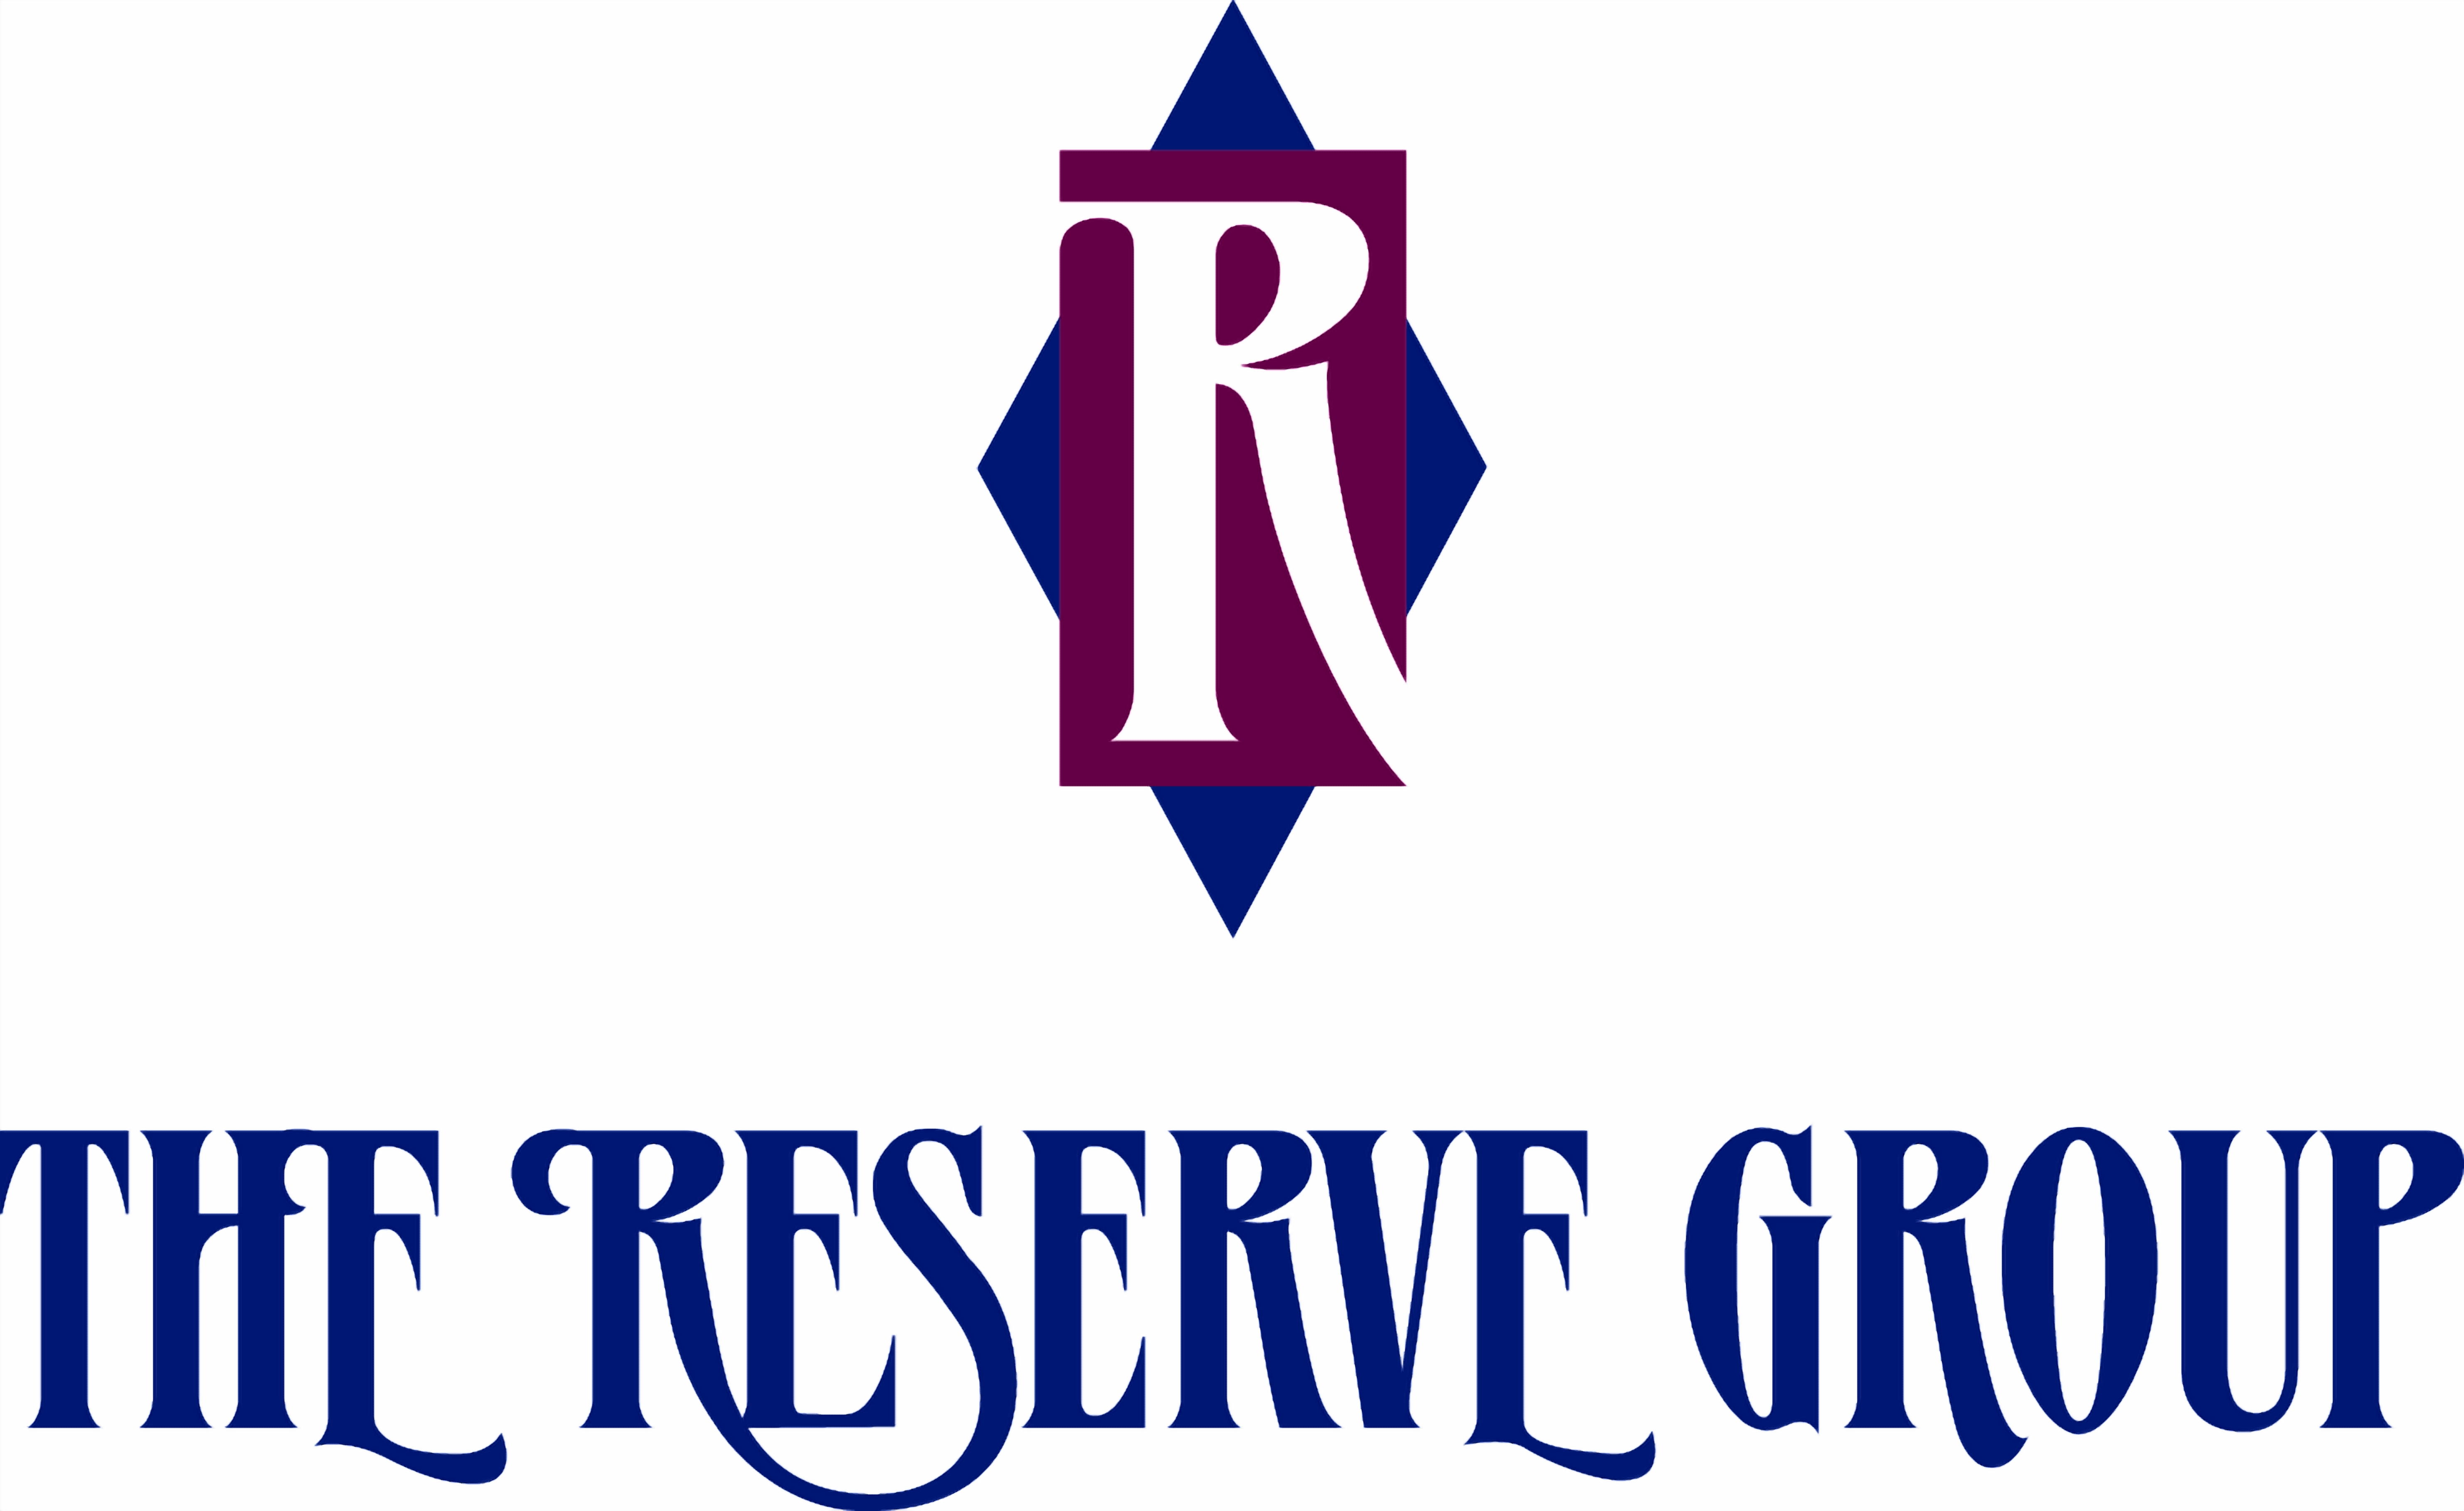 Reserve Group